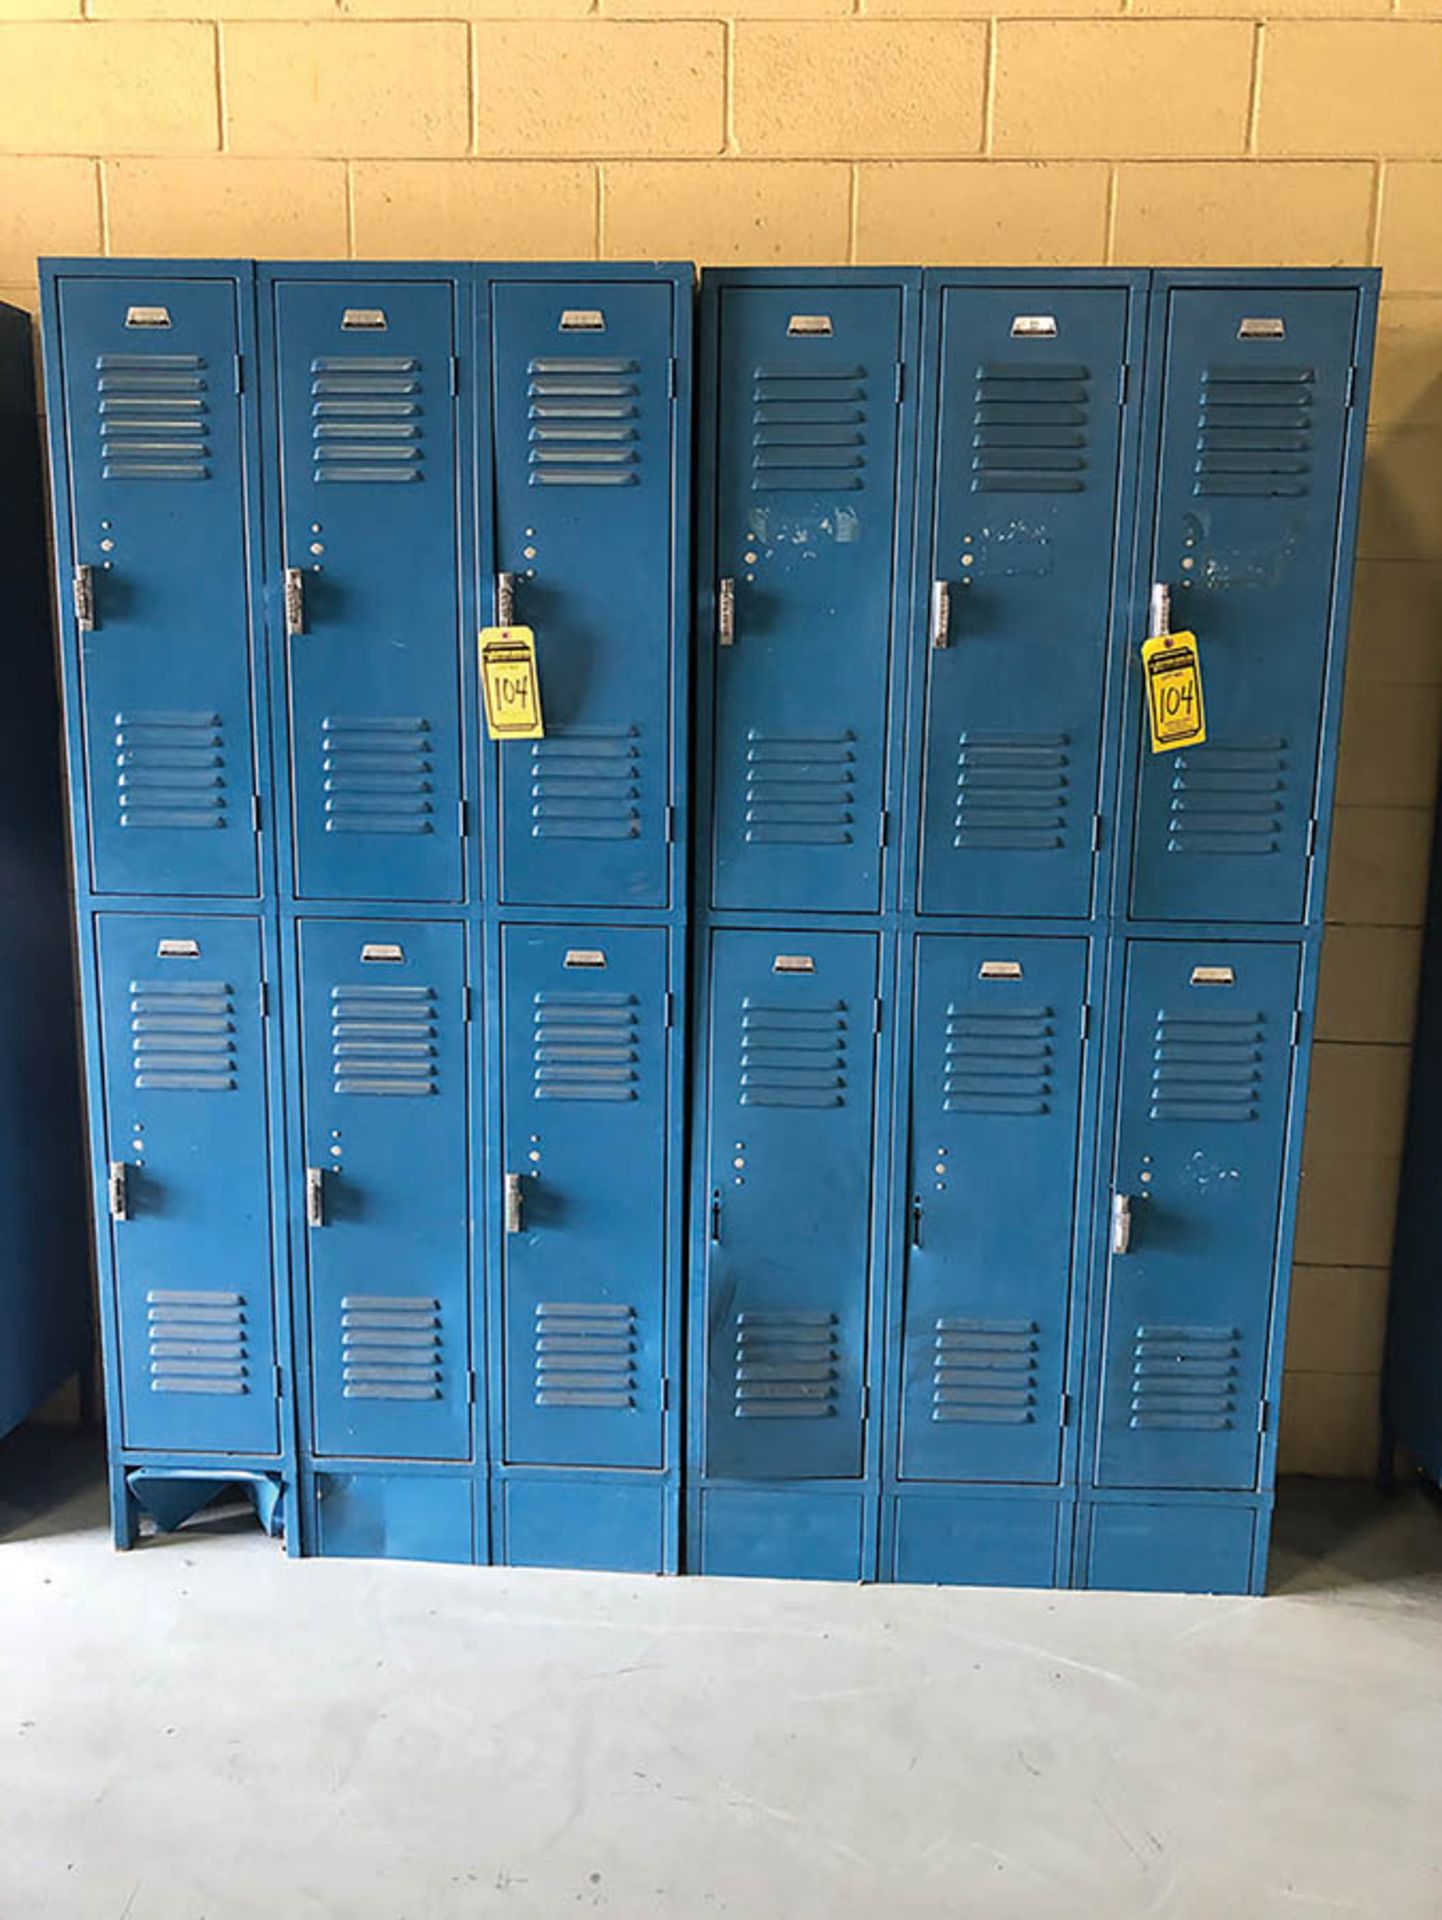 2 SECTIONS OF LOCKERS WITH 6 LOCKERS EACH